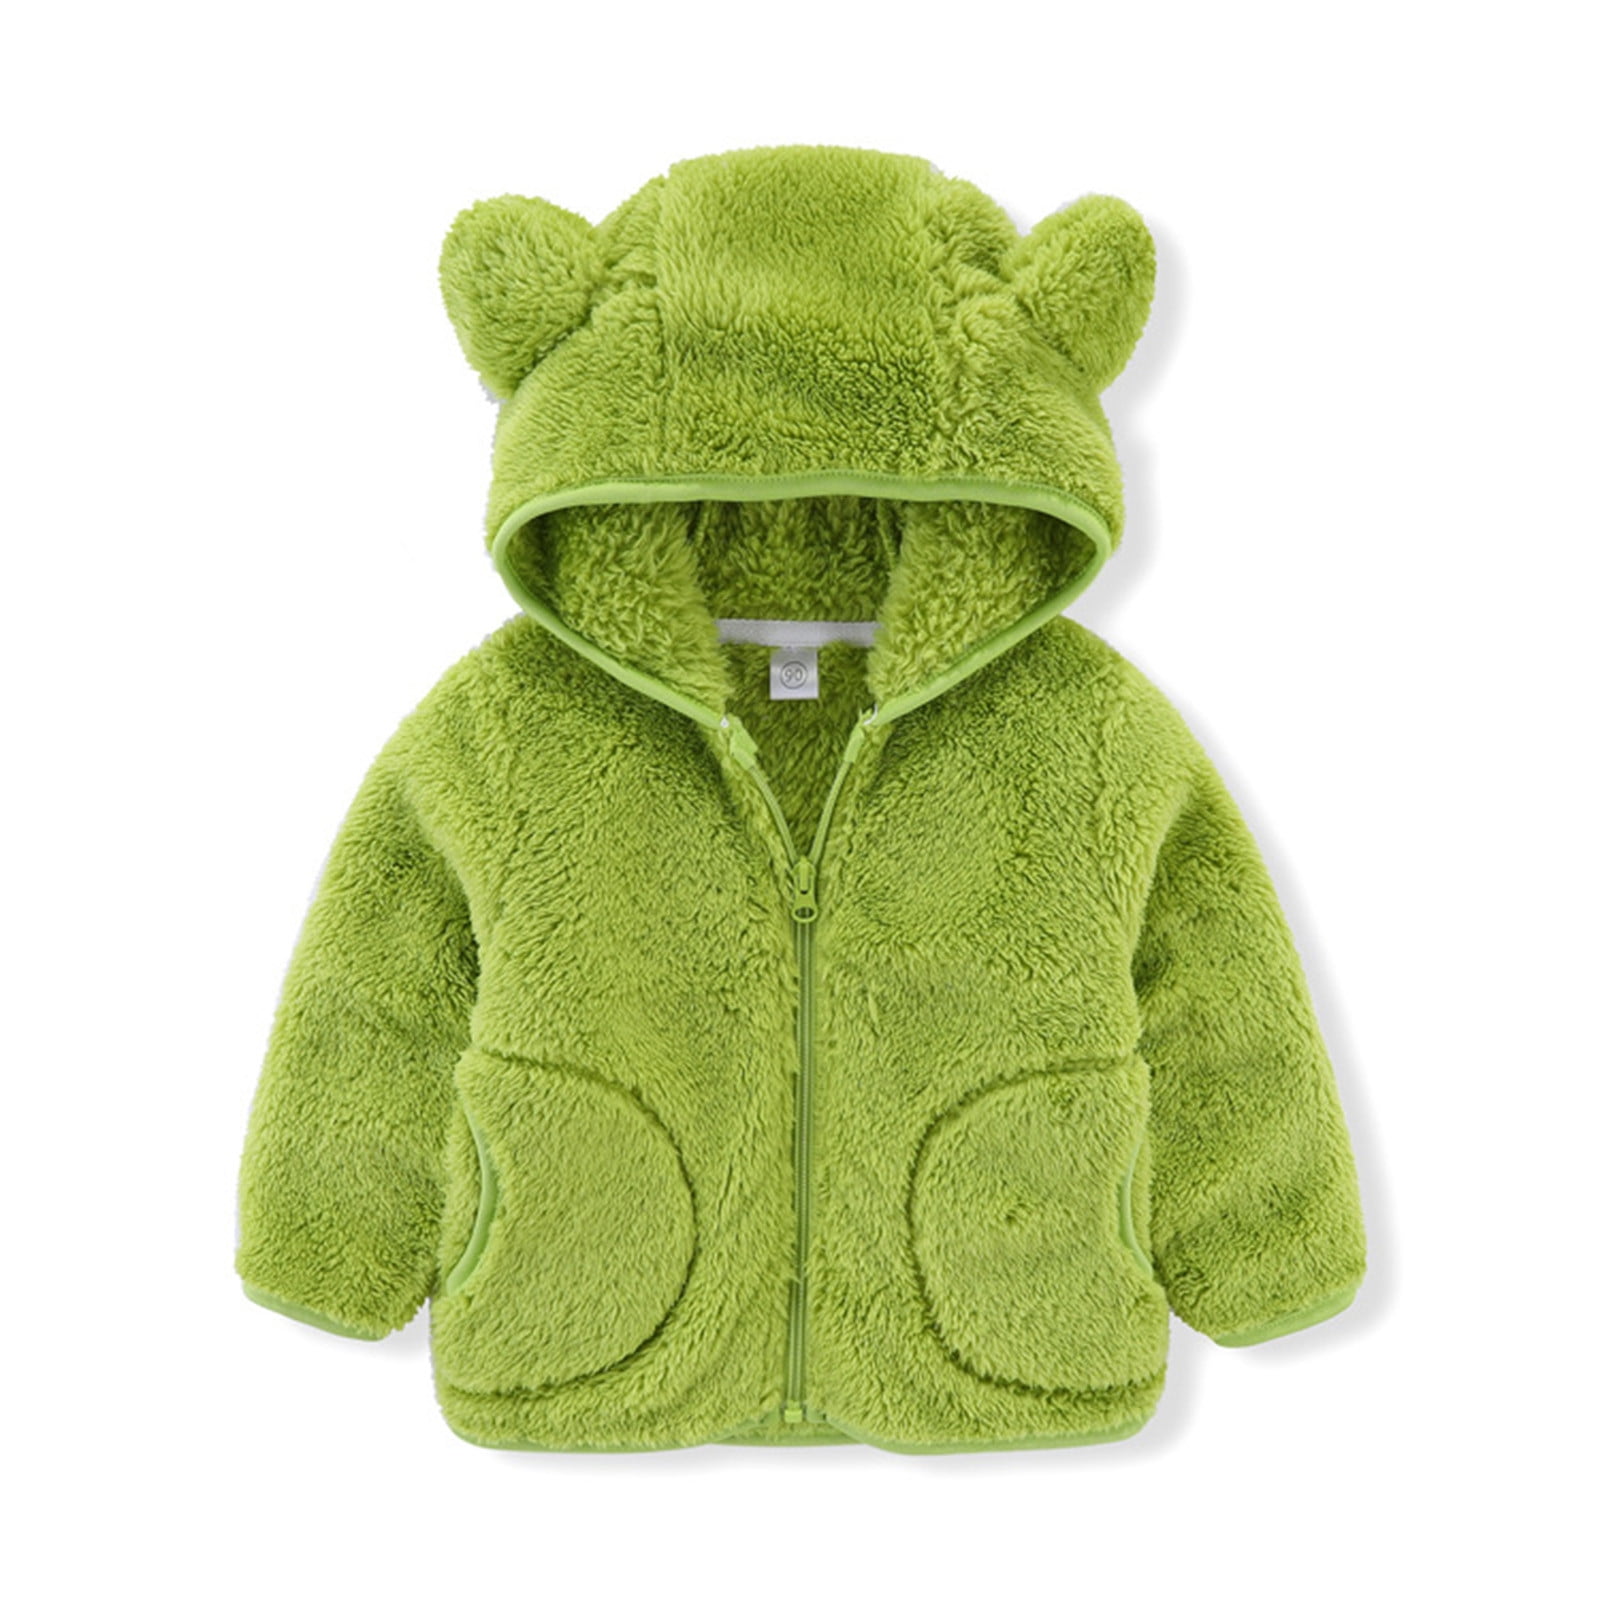 Details about   Children Warmer Jacket Spring  Autumn Outwear Baby Toddler Clothing With Hood 